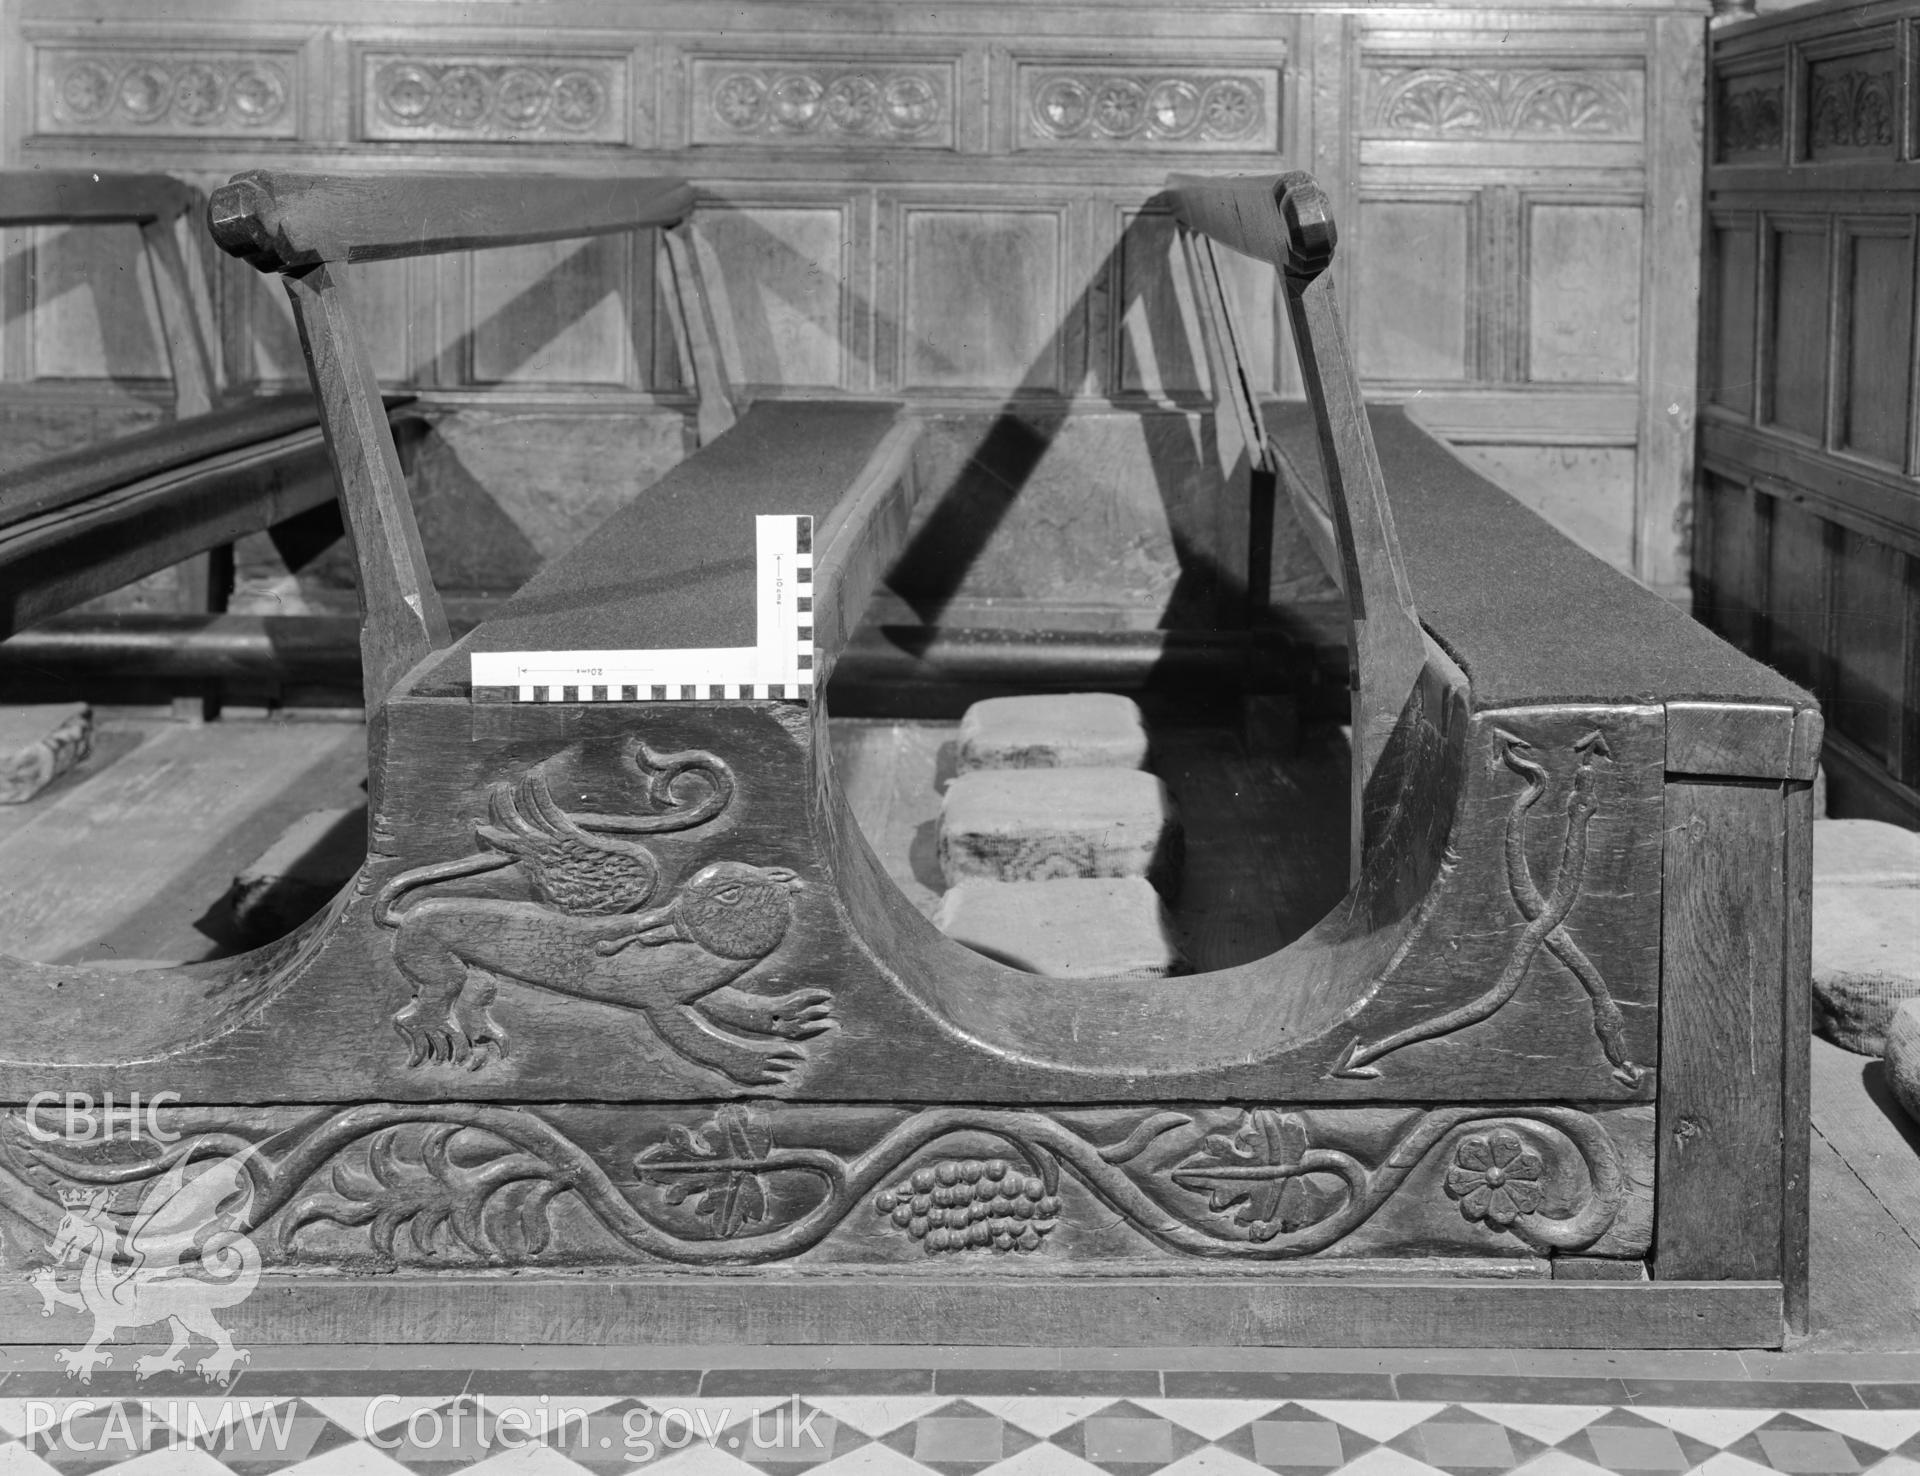 Digital copy of a black and white negative showing carved wooden pews at Rhug Chapel, taken by Department of Environment.